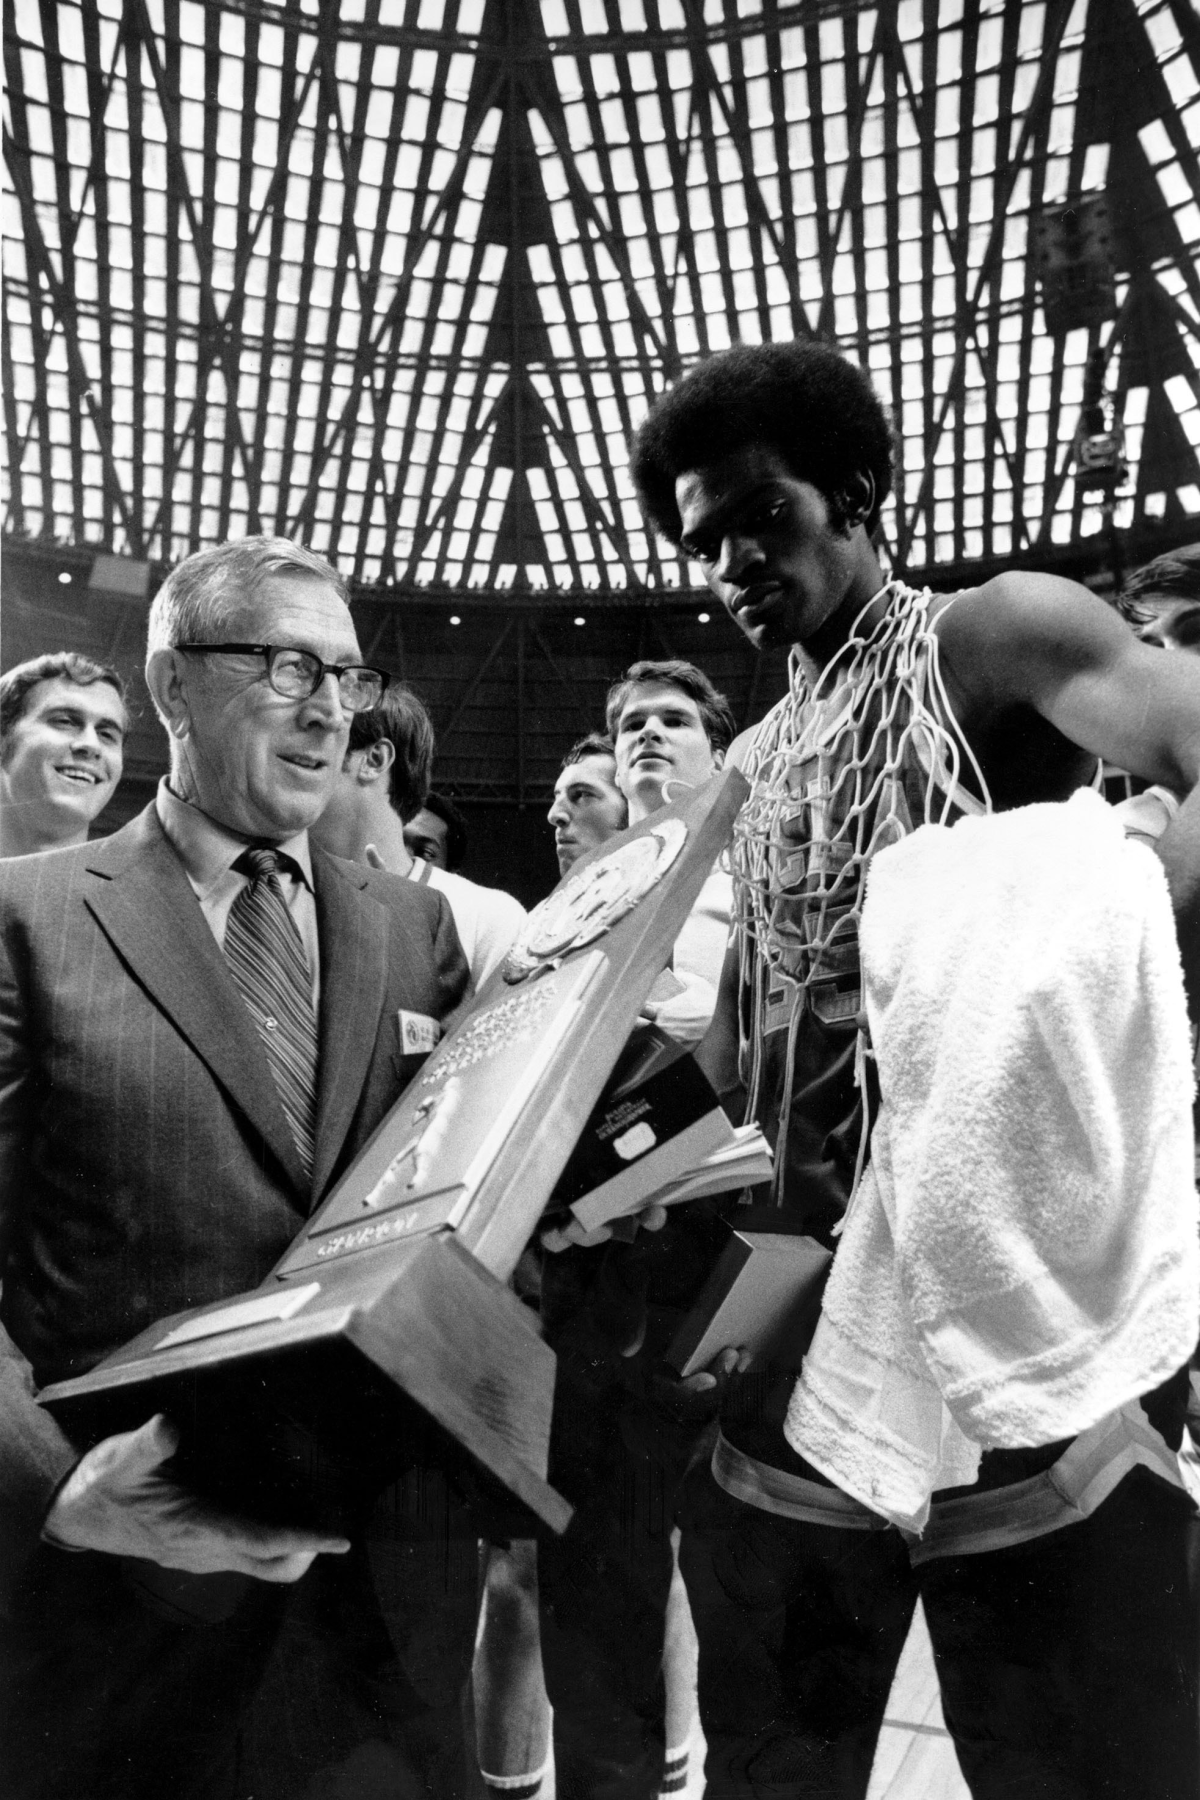 John Wooden holds the championship trophy and Sidney Wicks wears the net around his neck at the 1971 NCAA tournament.